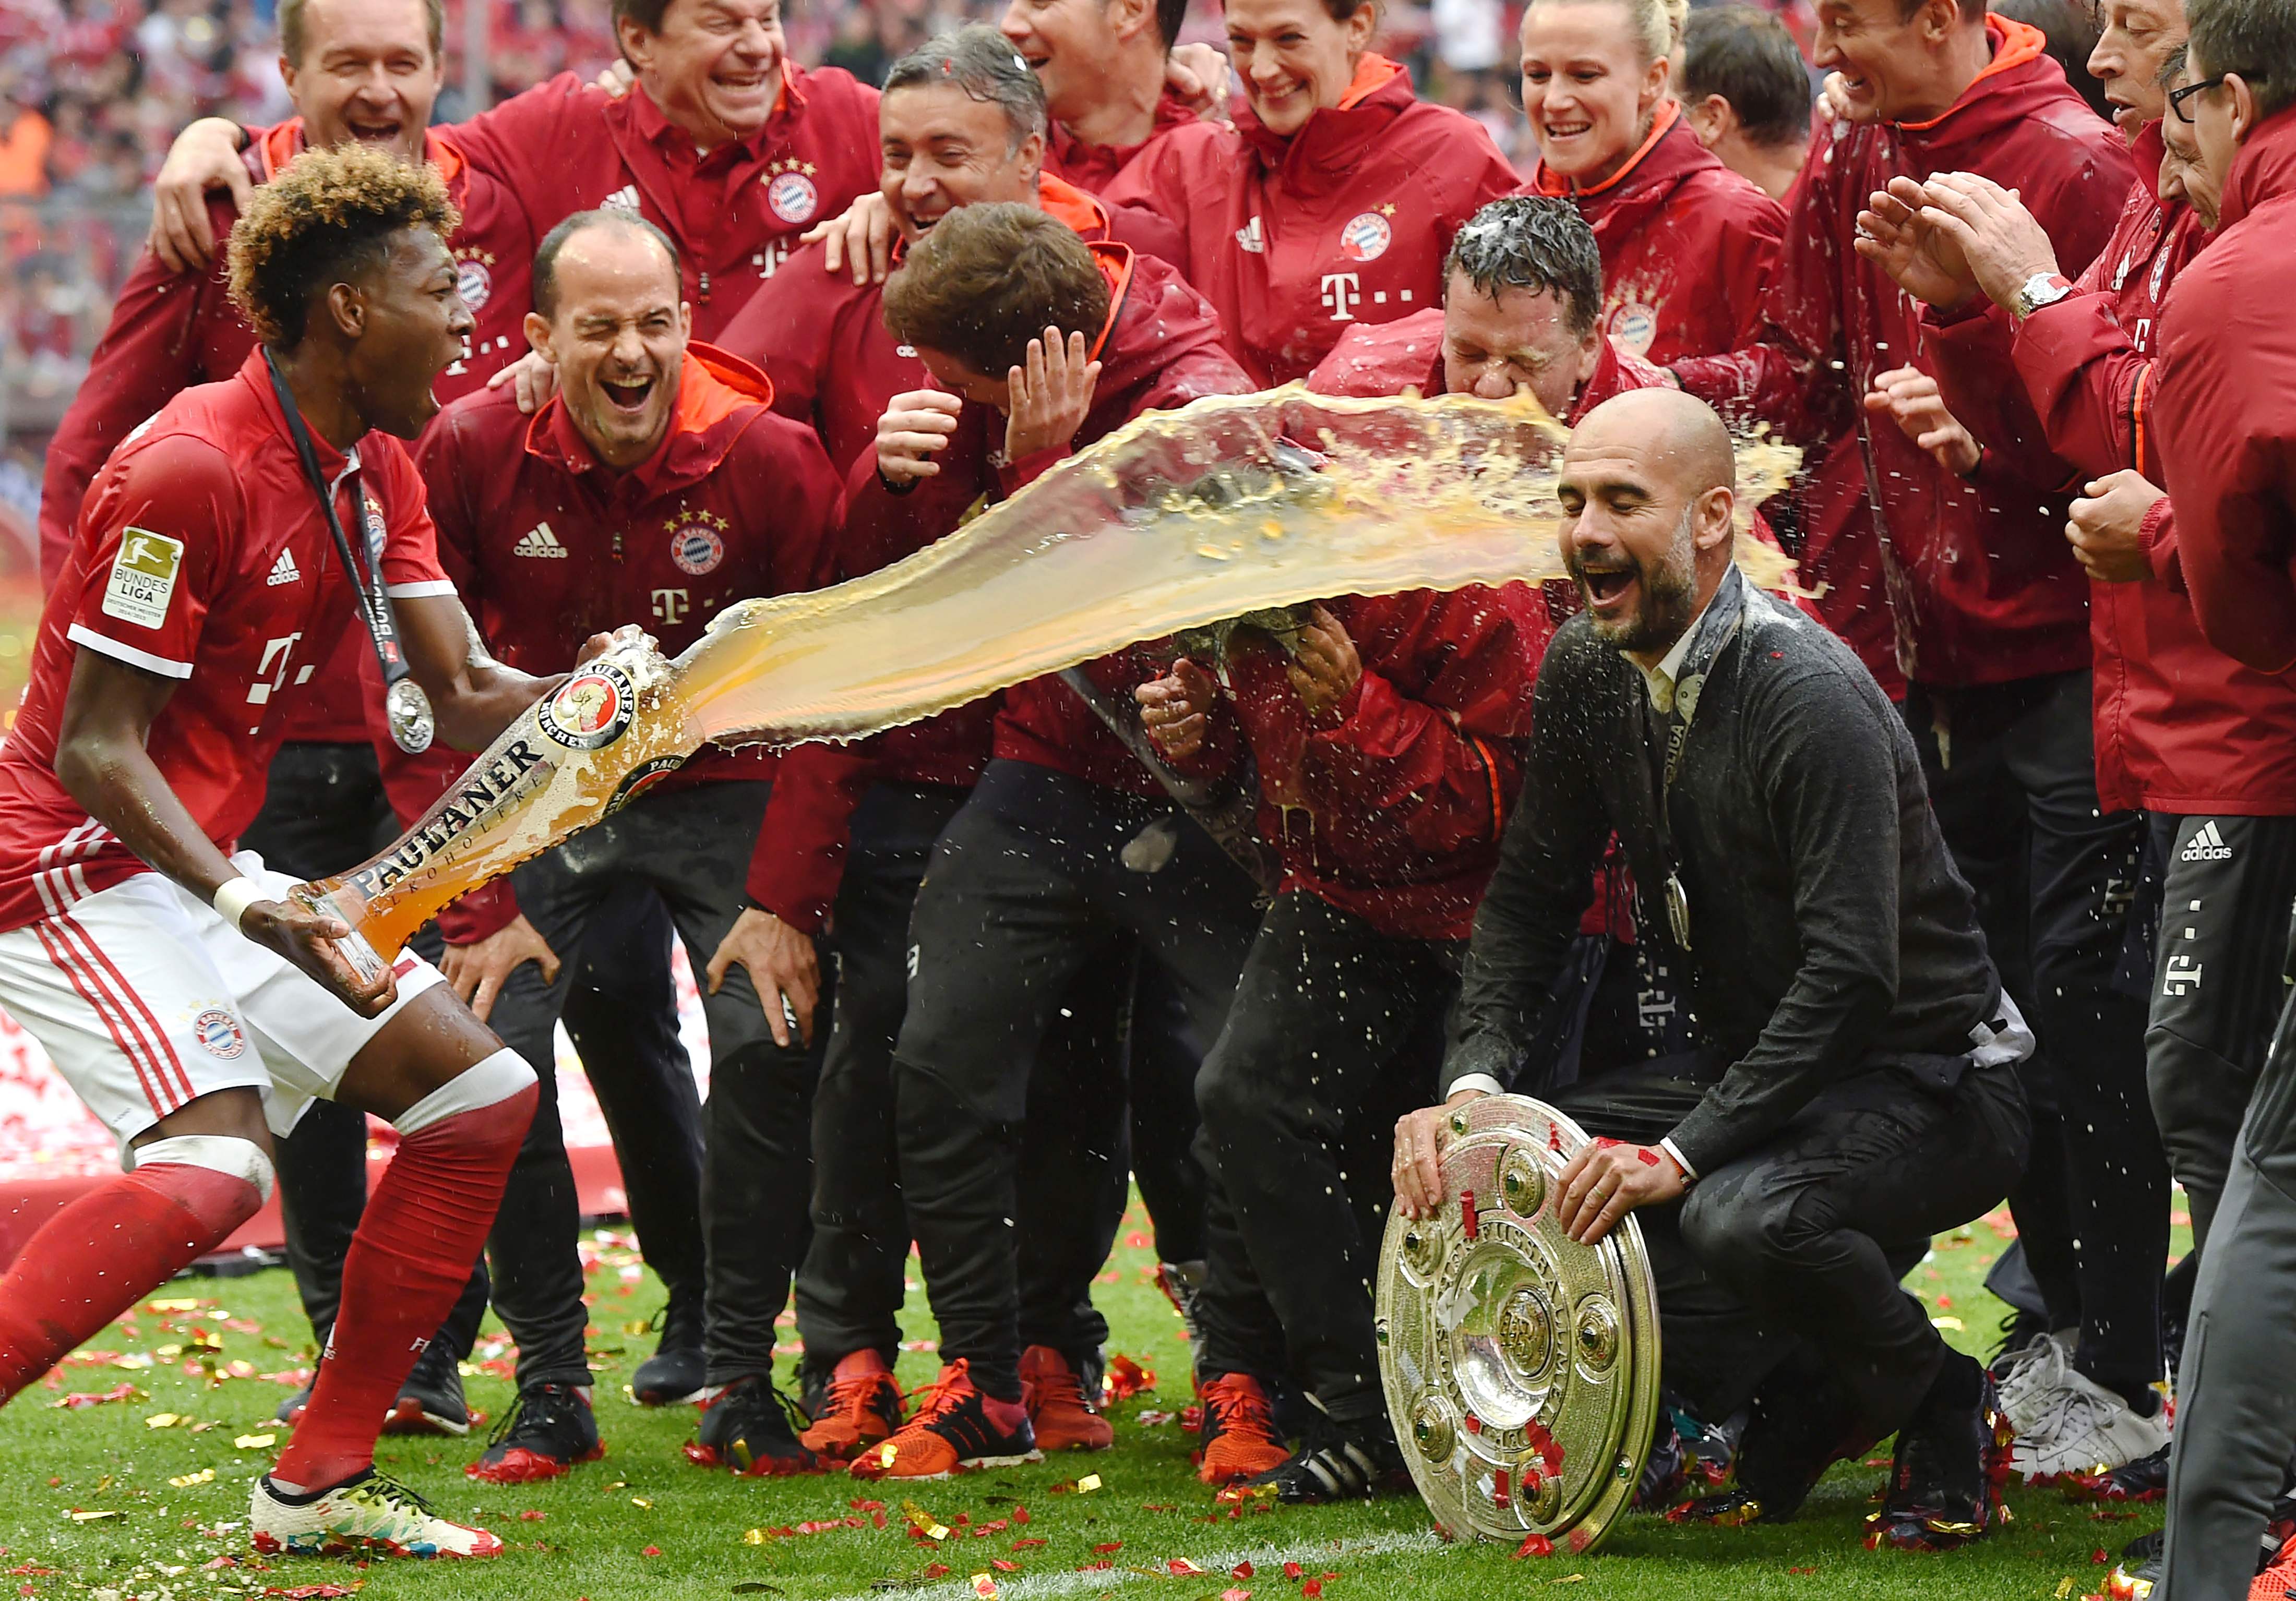 Bayern Munich's beer-soaked Bundesliga title celebration produced some photos | For Win